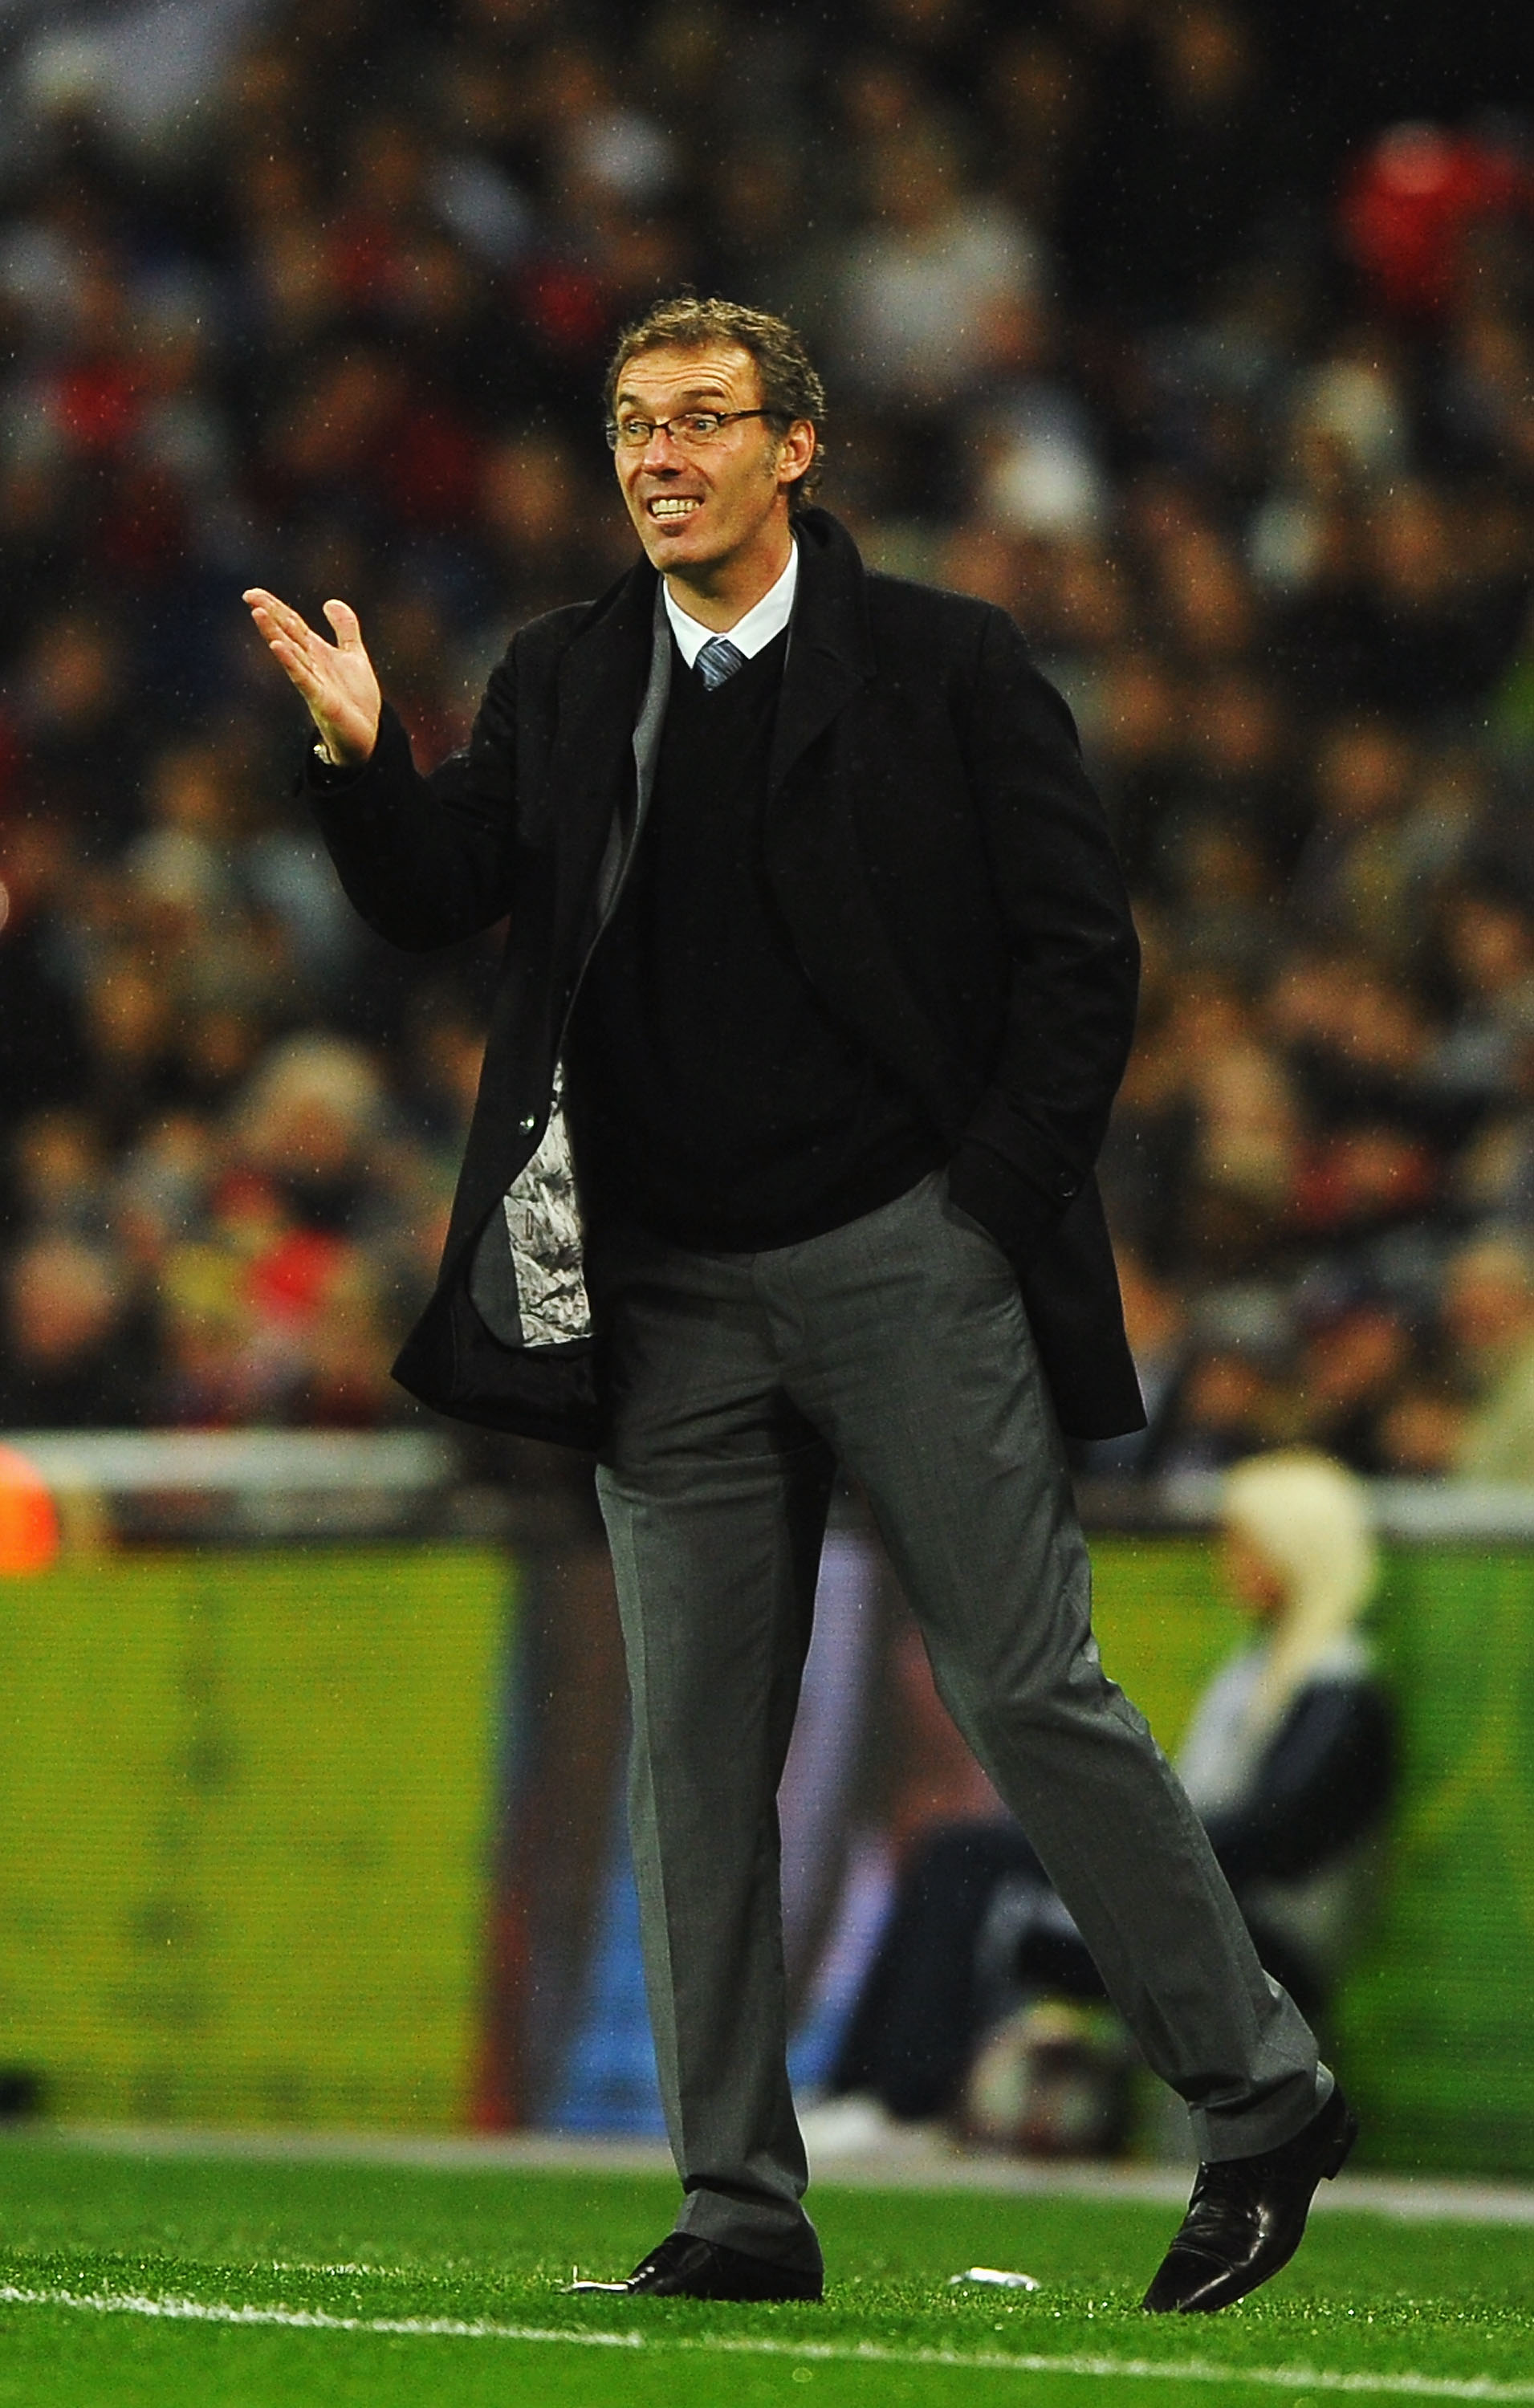 LONDON, ENGLAND - NOVEMBER 17:  Laurent Blanc coach of France signals from the touchline during the international friendly match between England and France at Wembley Stadium on November 17, 2010 in London, England.  (Photo by Laurence Griffiths/Getty Ima